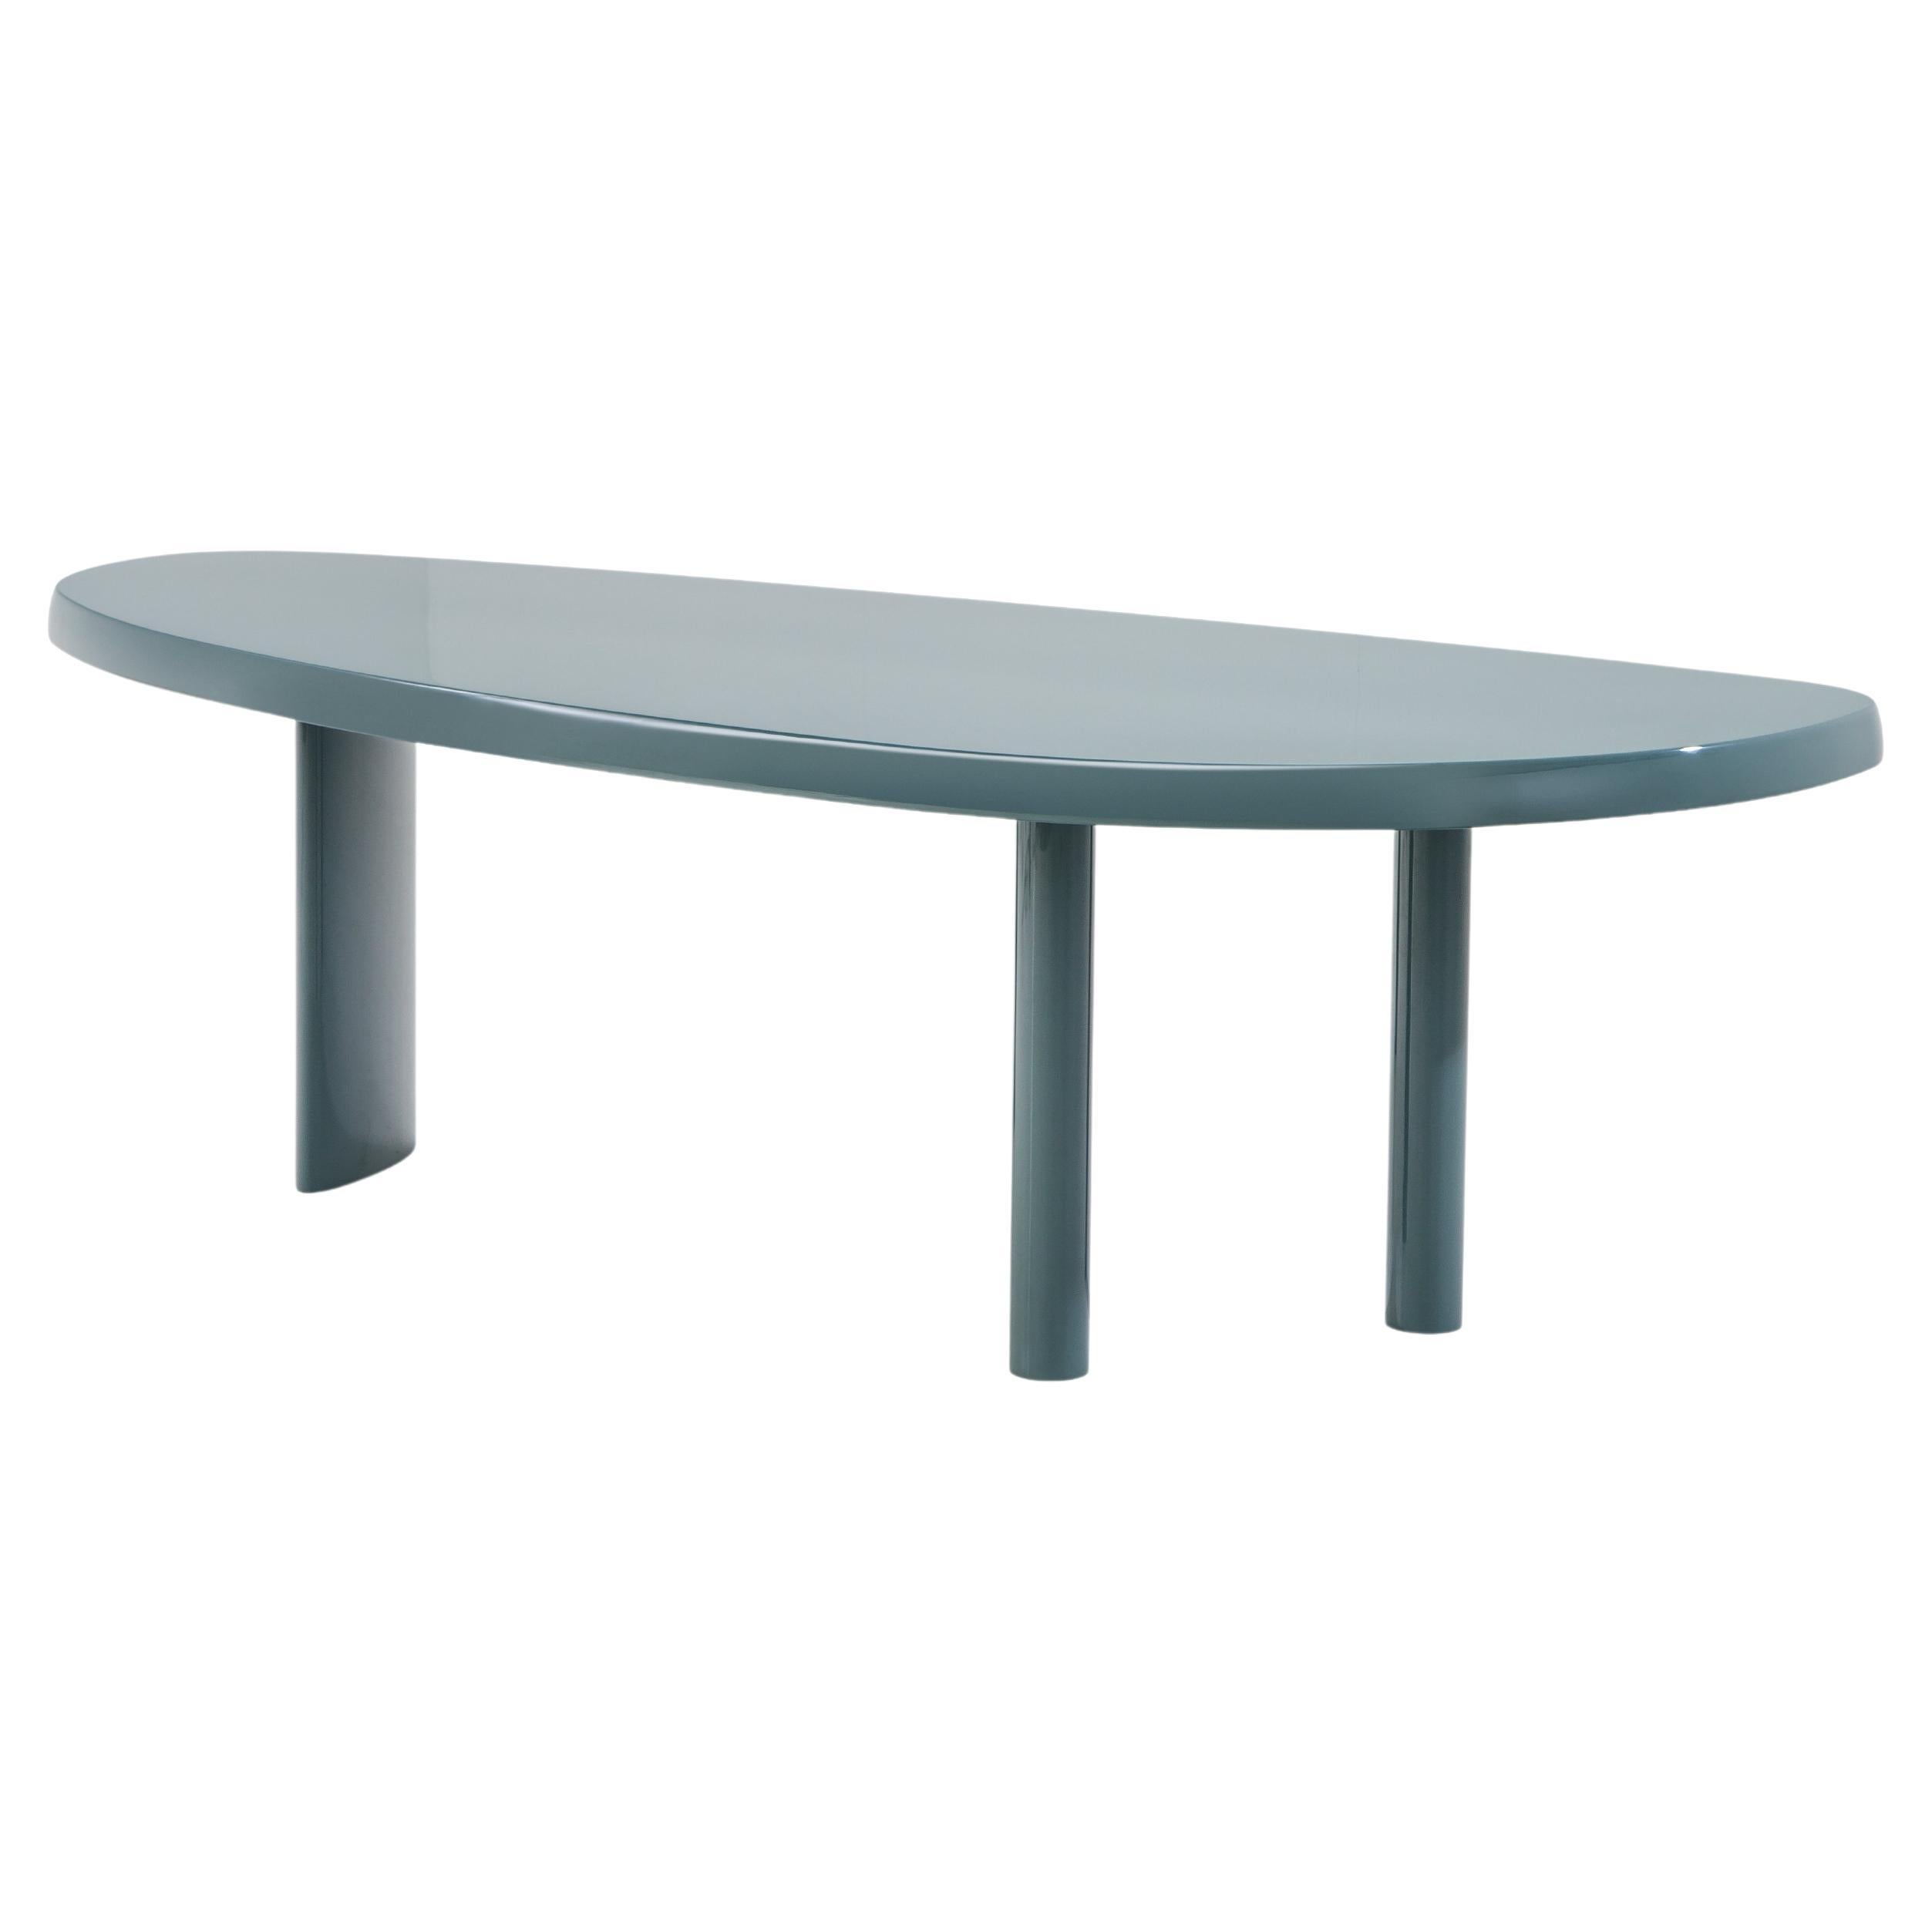 Charlotte Perriand Table En Forme Libre, Sage Green Lacquered Wood by Cassina